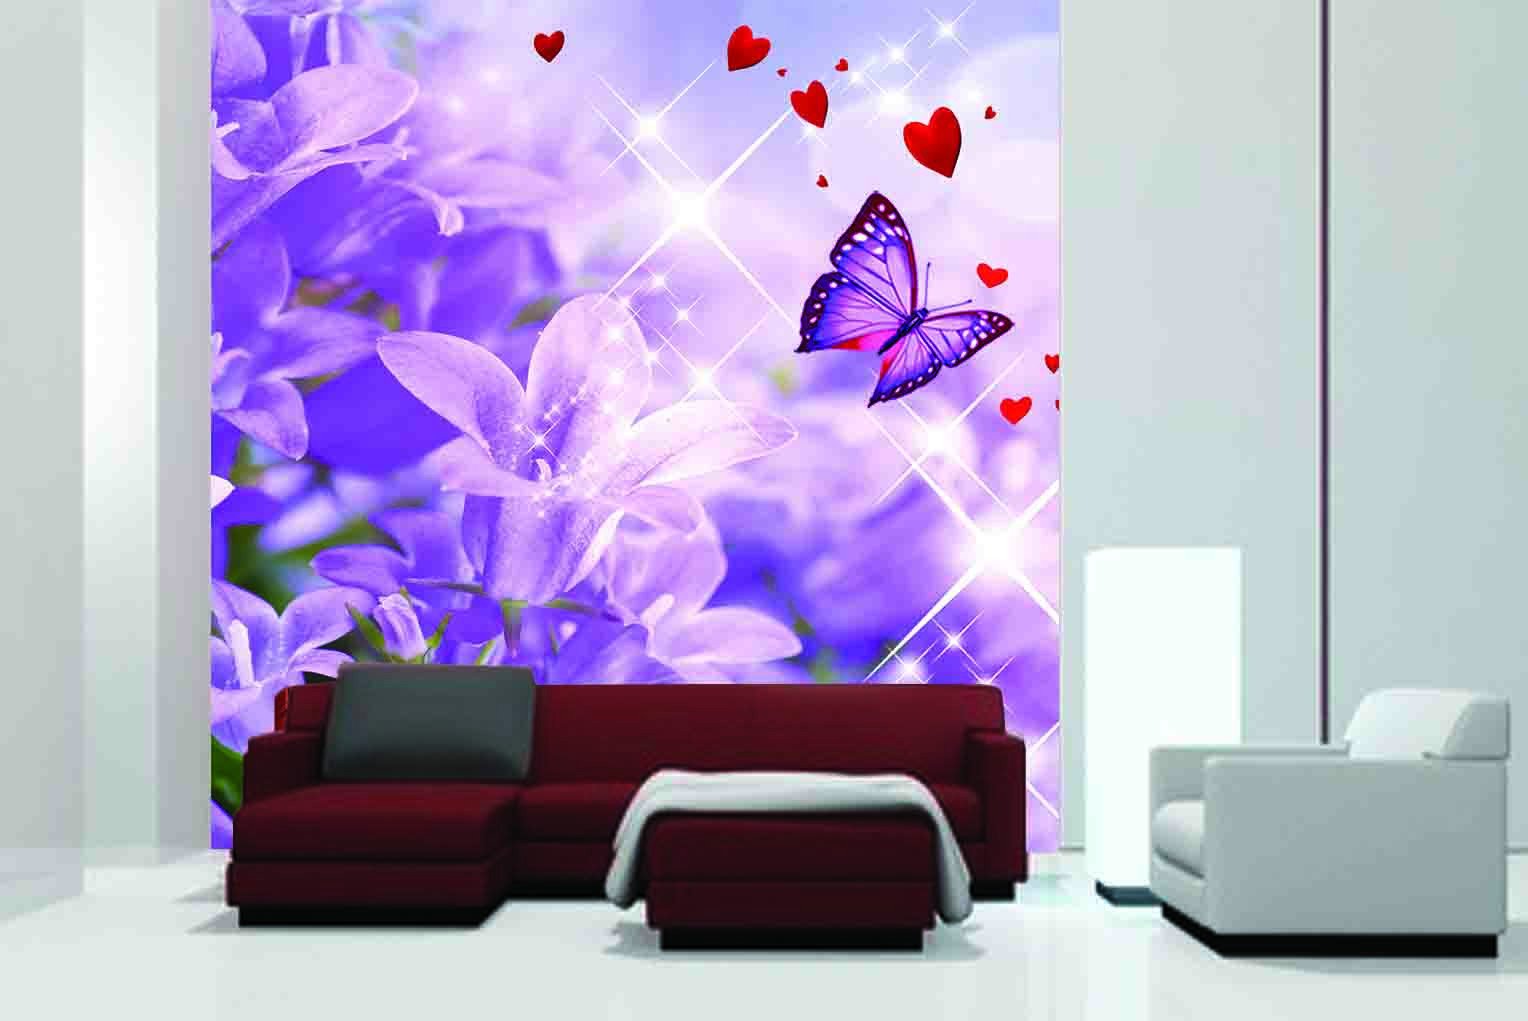 Fantasy Decor 3D Wallpaper Purple Flowers Butterfly TV Background Mural  Vibrant Colors, Realistic Design, Easy To Install, Perfect For Bedroom And  Living Room Decor. From Yunlin188, $29.15